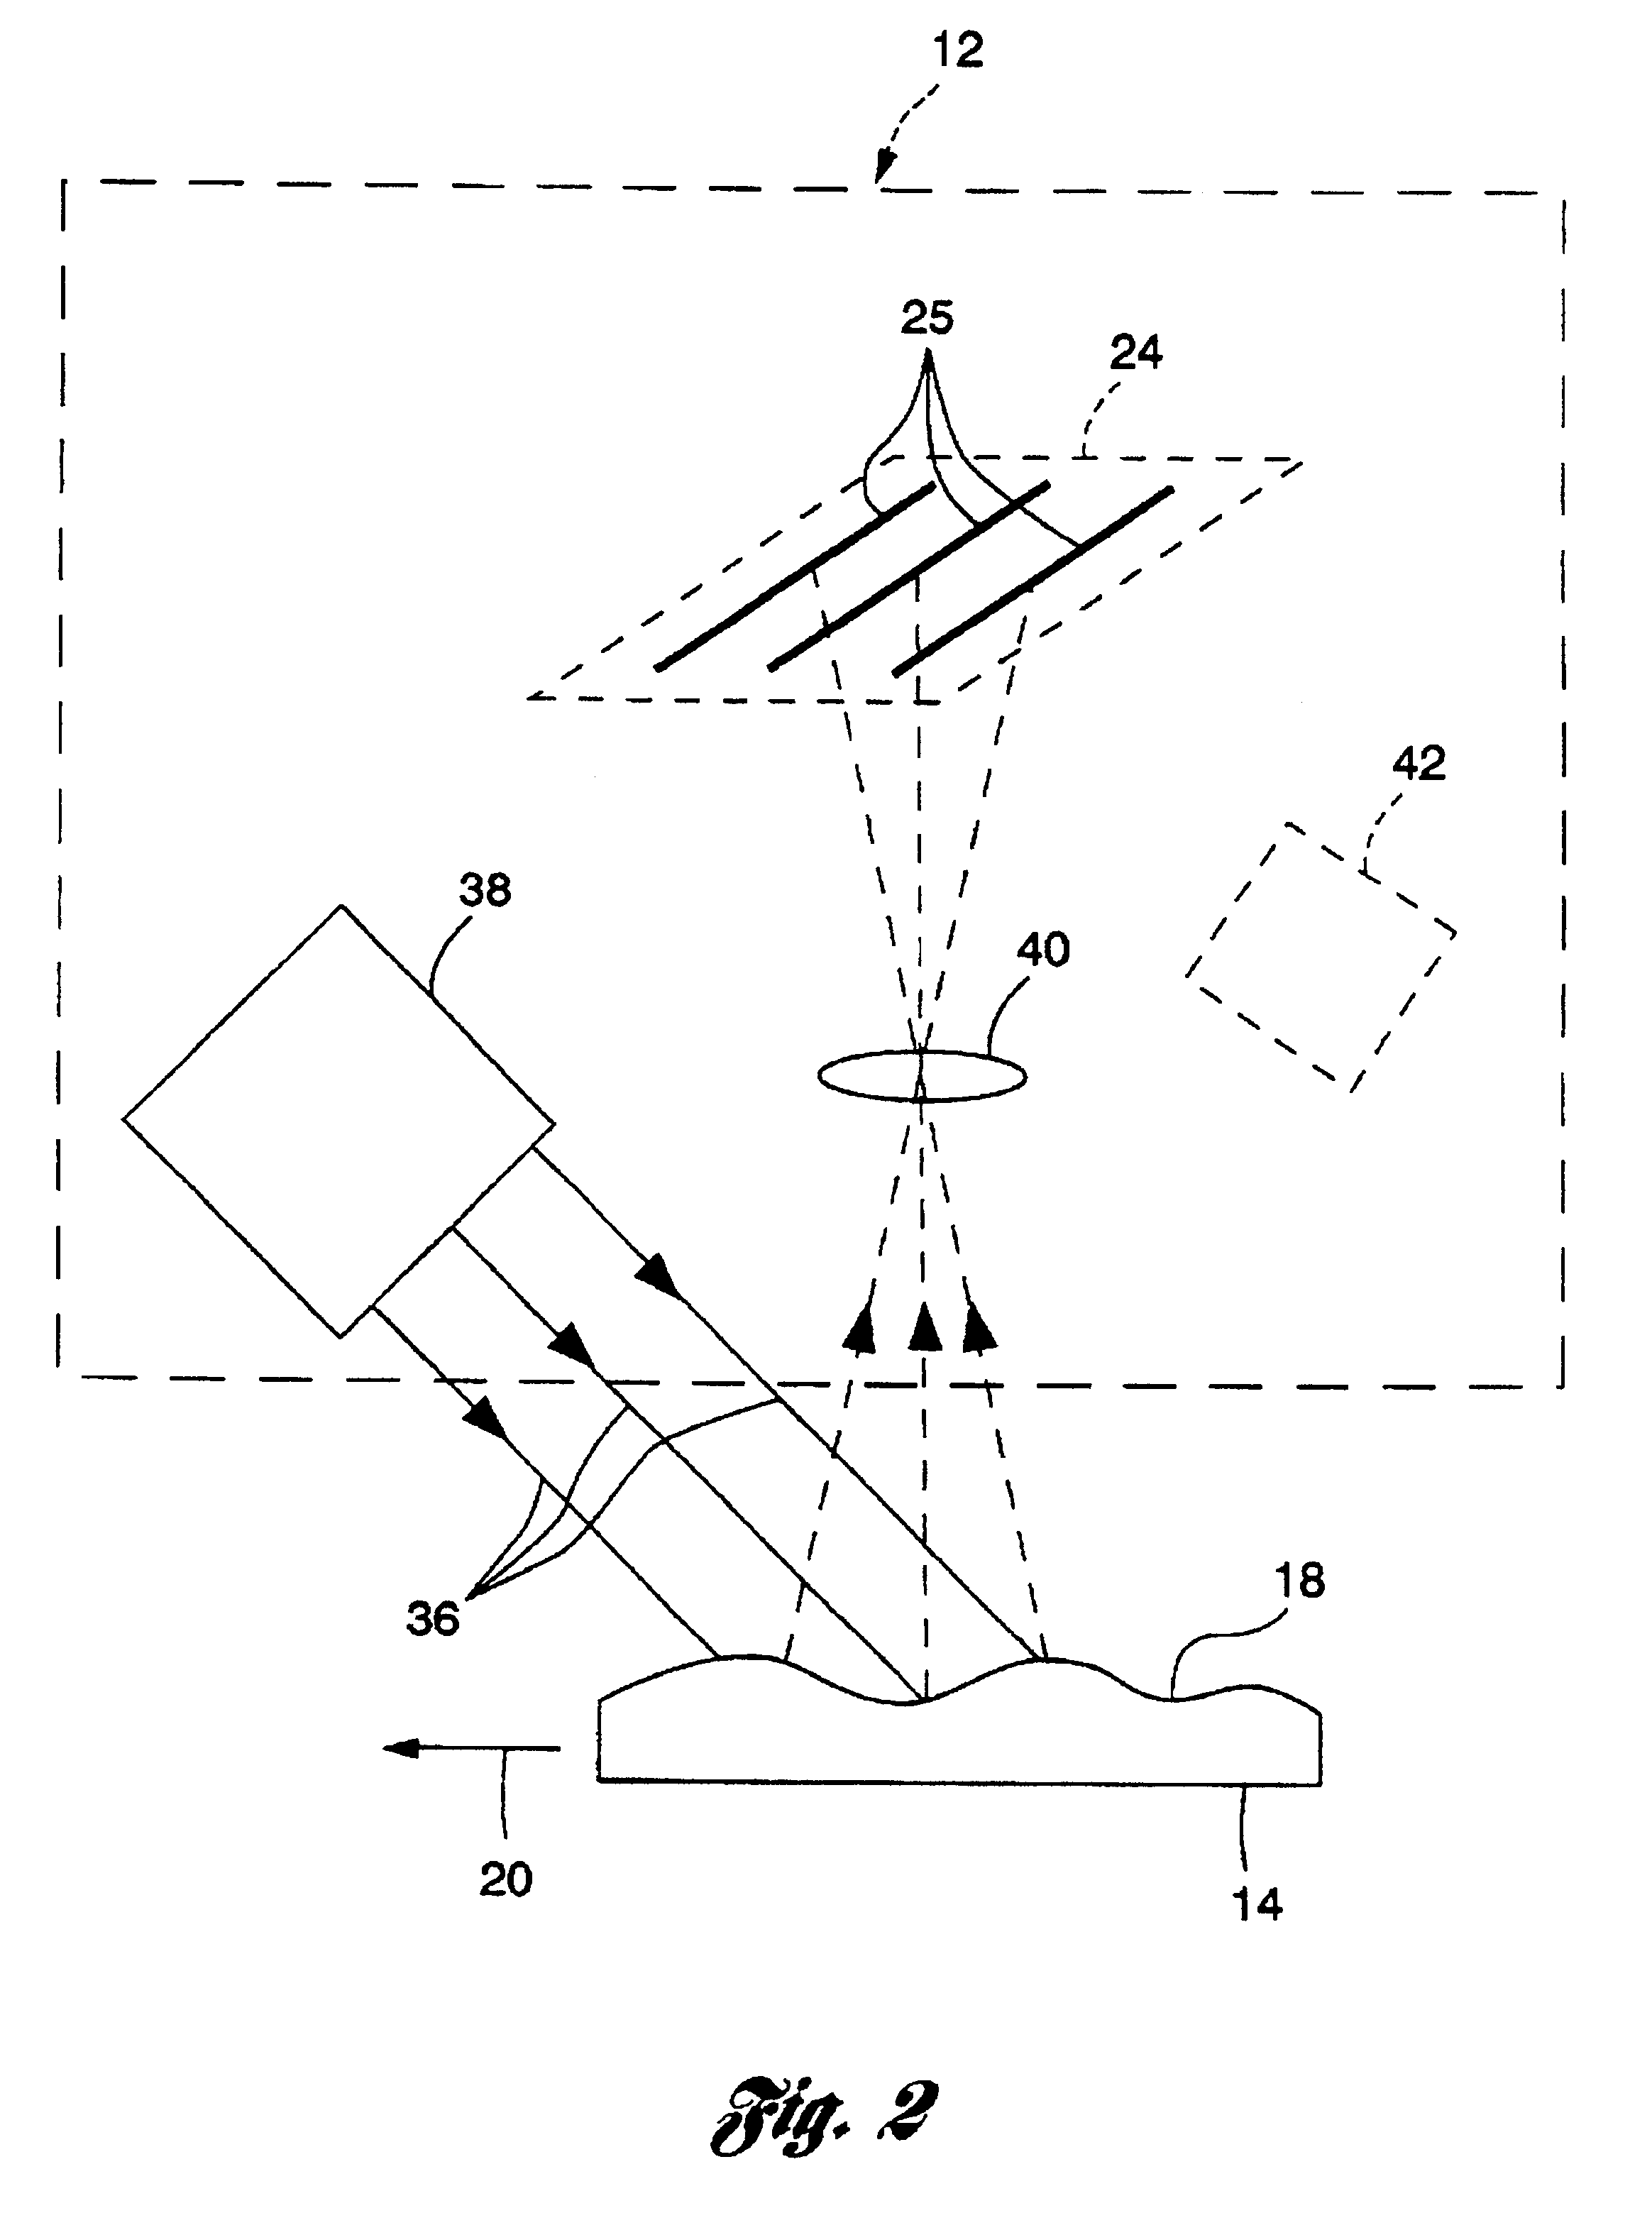 Scanning phase measuring method and system for an object at a vision station